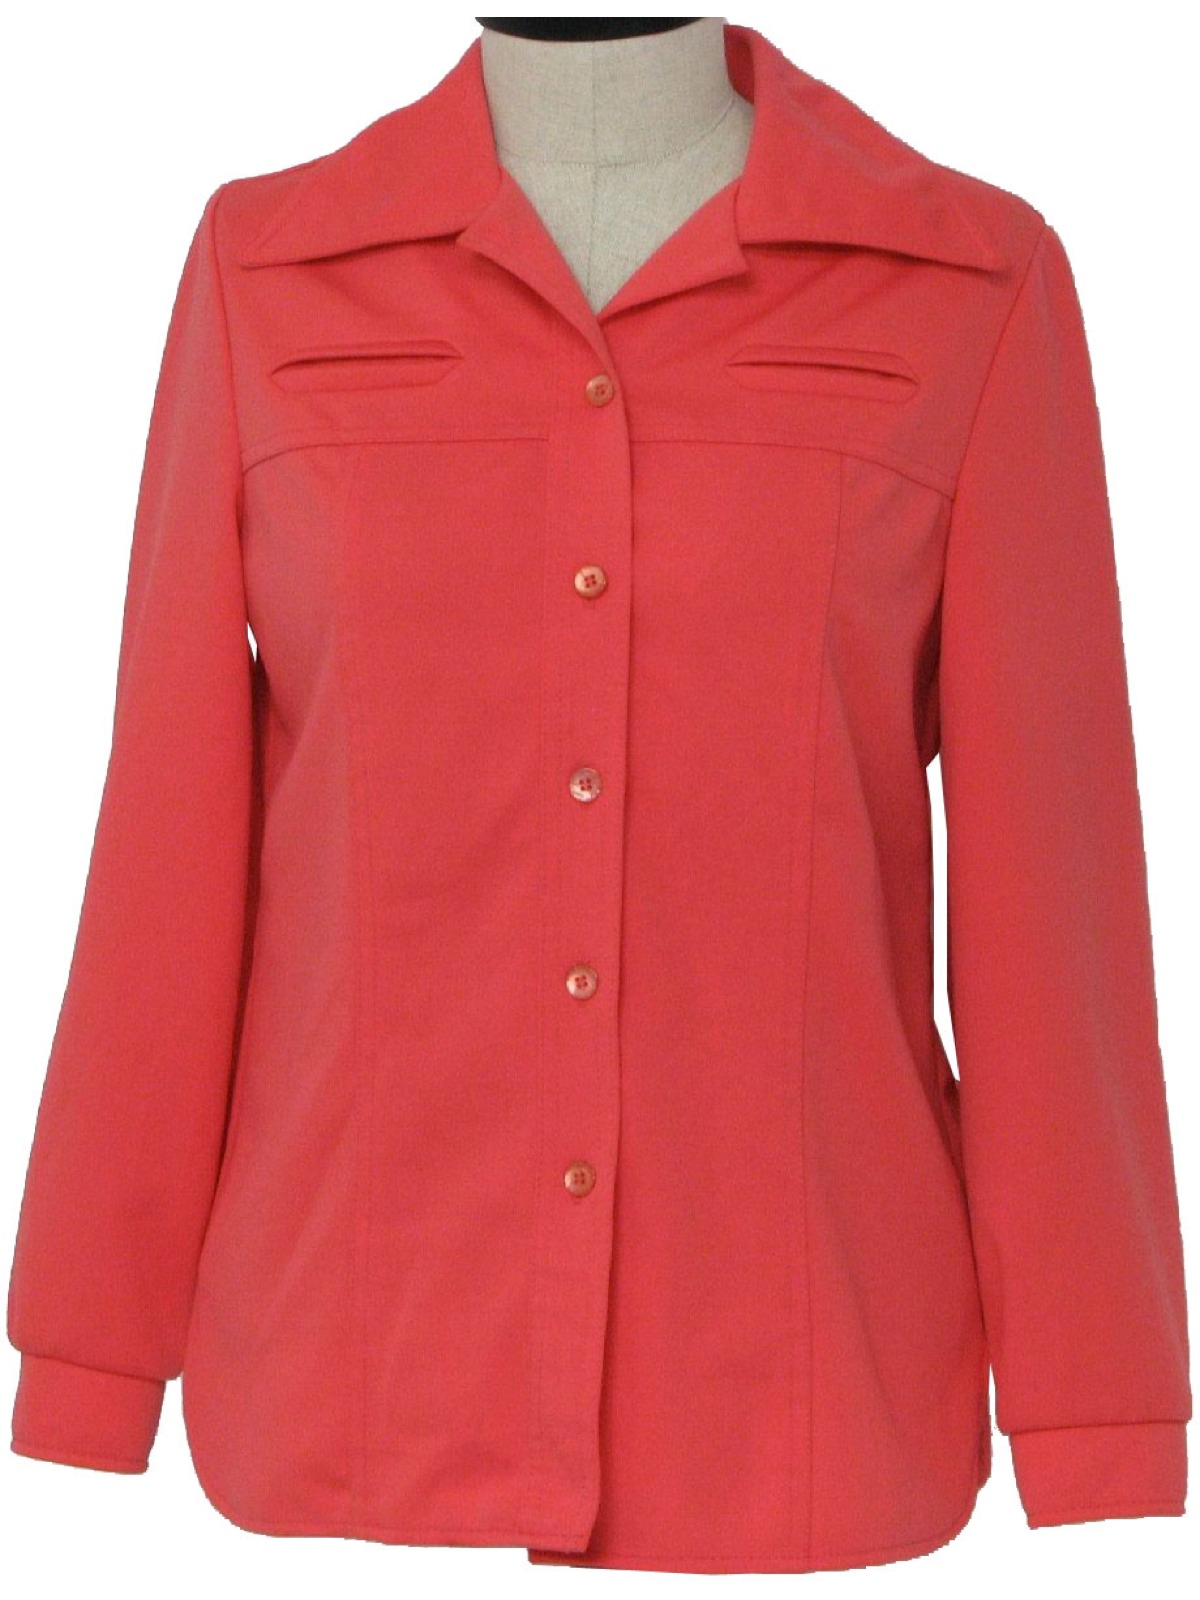 Seventies Vintage Jacket: 70s -Jack Winter- Womens coral polyester